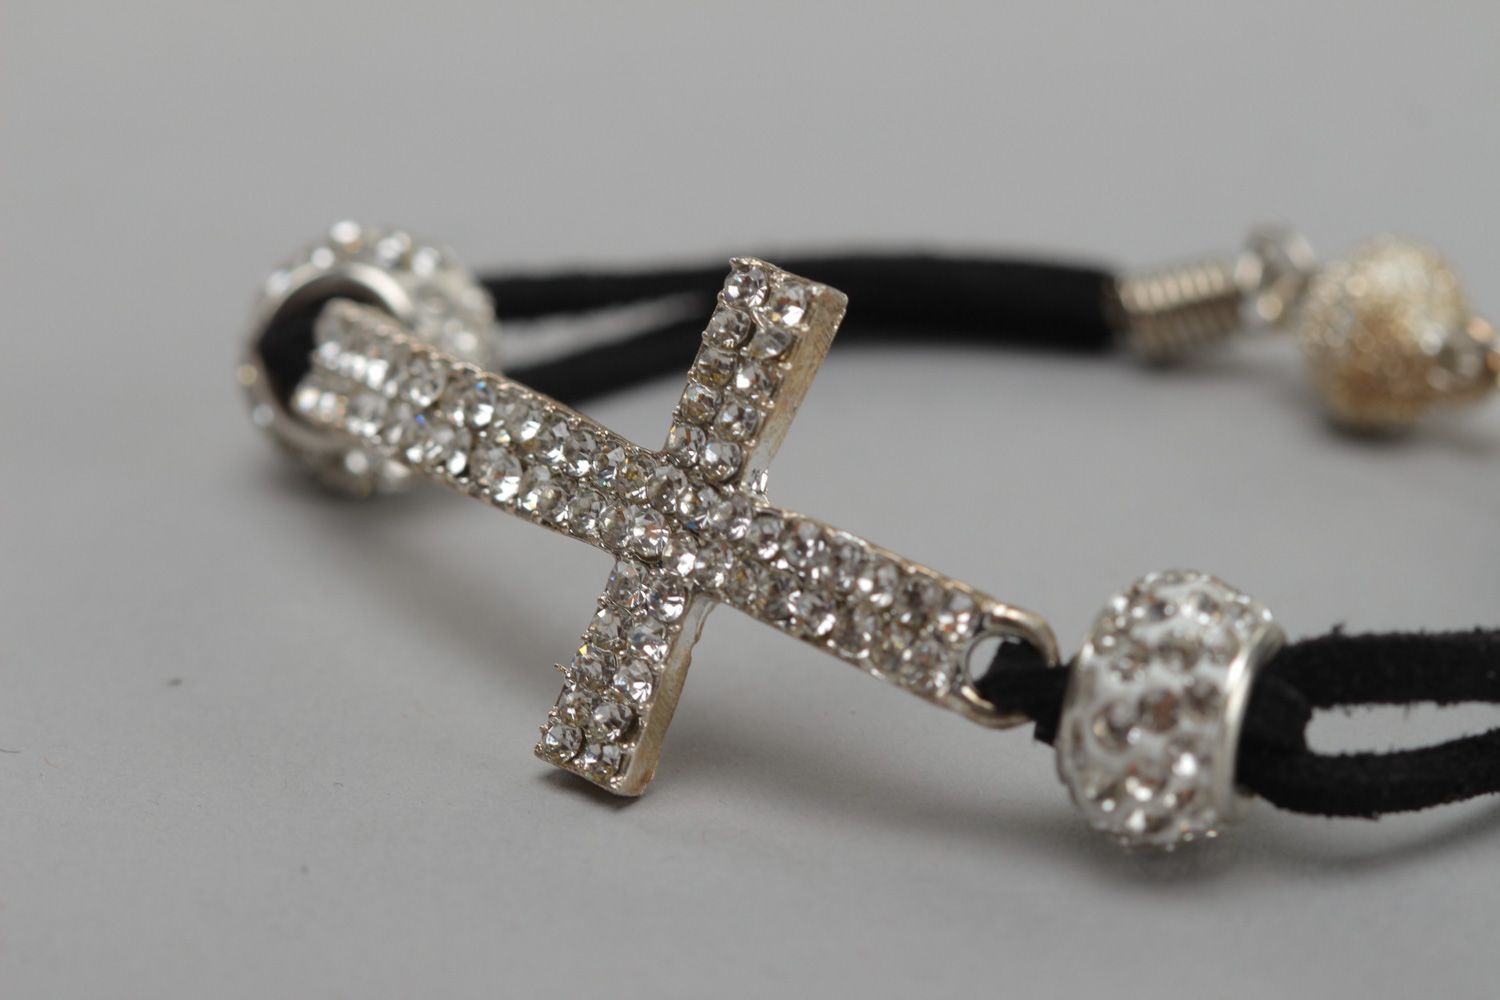 Black handmade artificial suede wrist bracelet with cross charm and strasses for girls photo 3